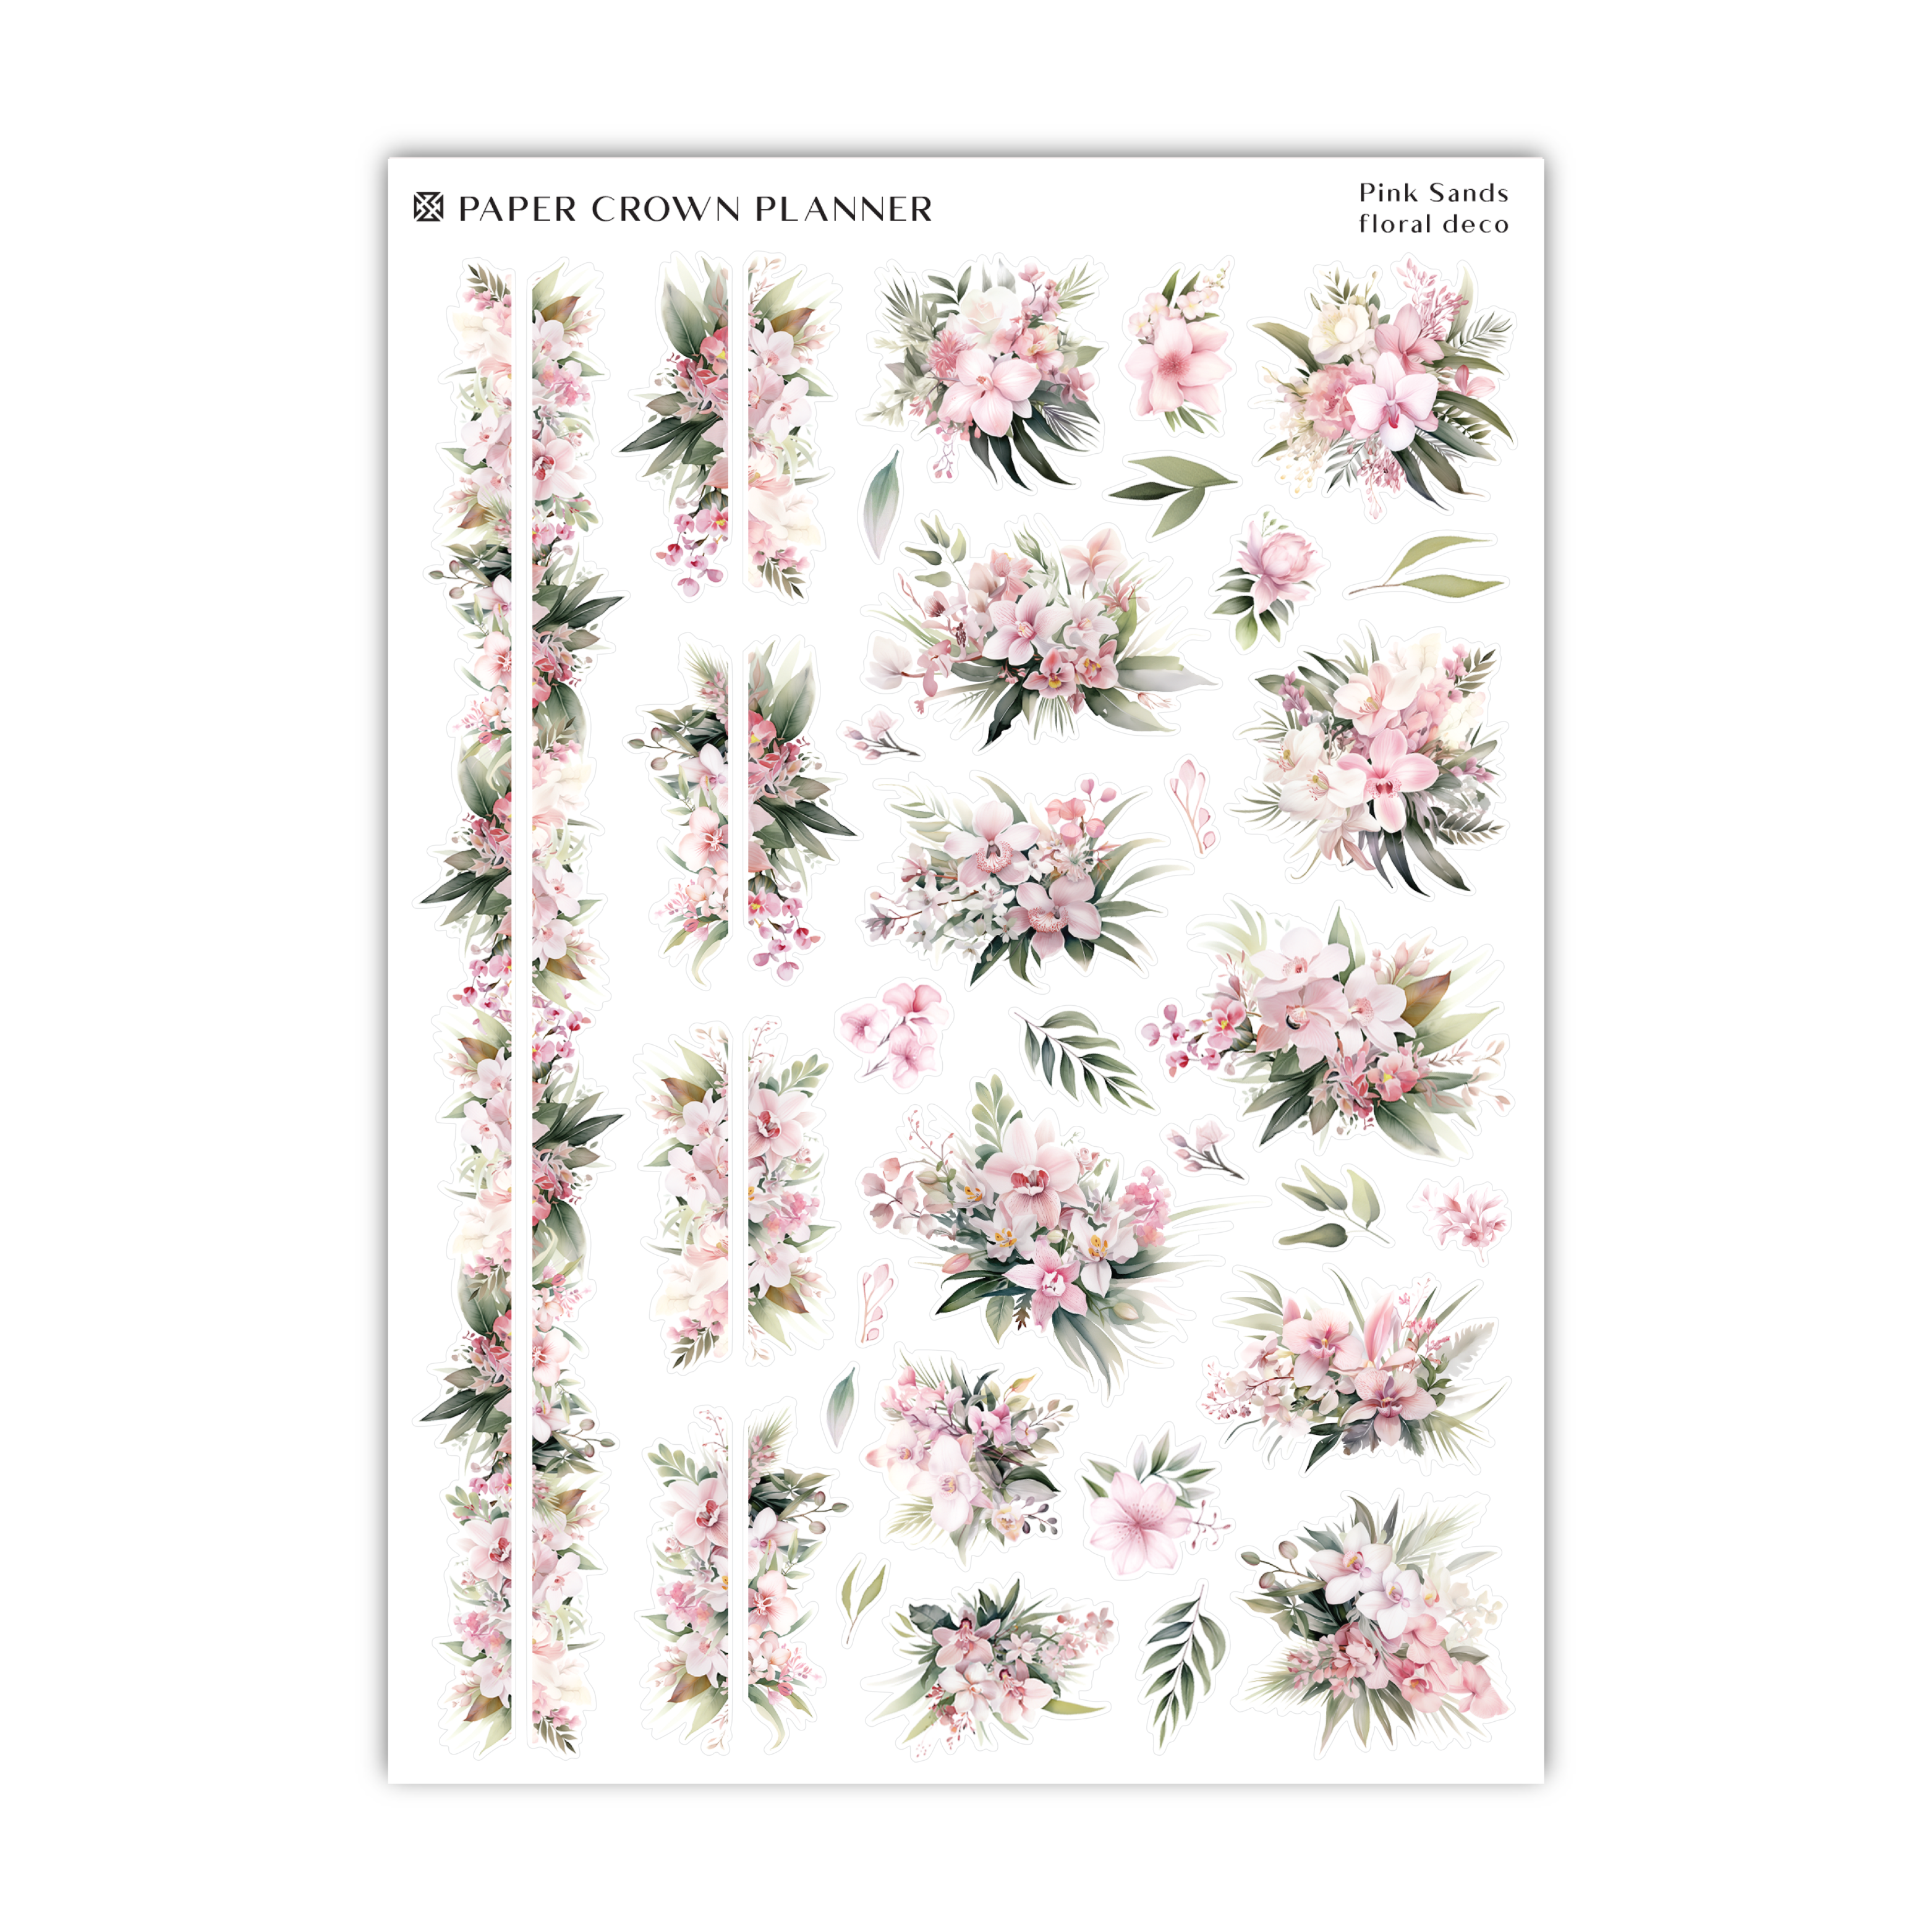 paper crown planner stickers featuring pink flowers